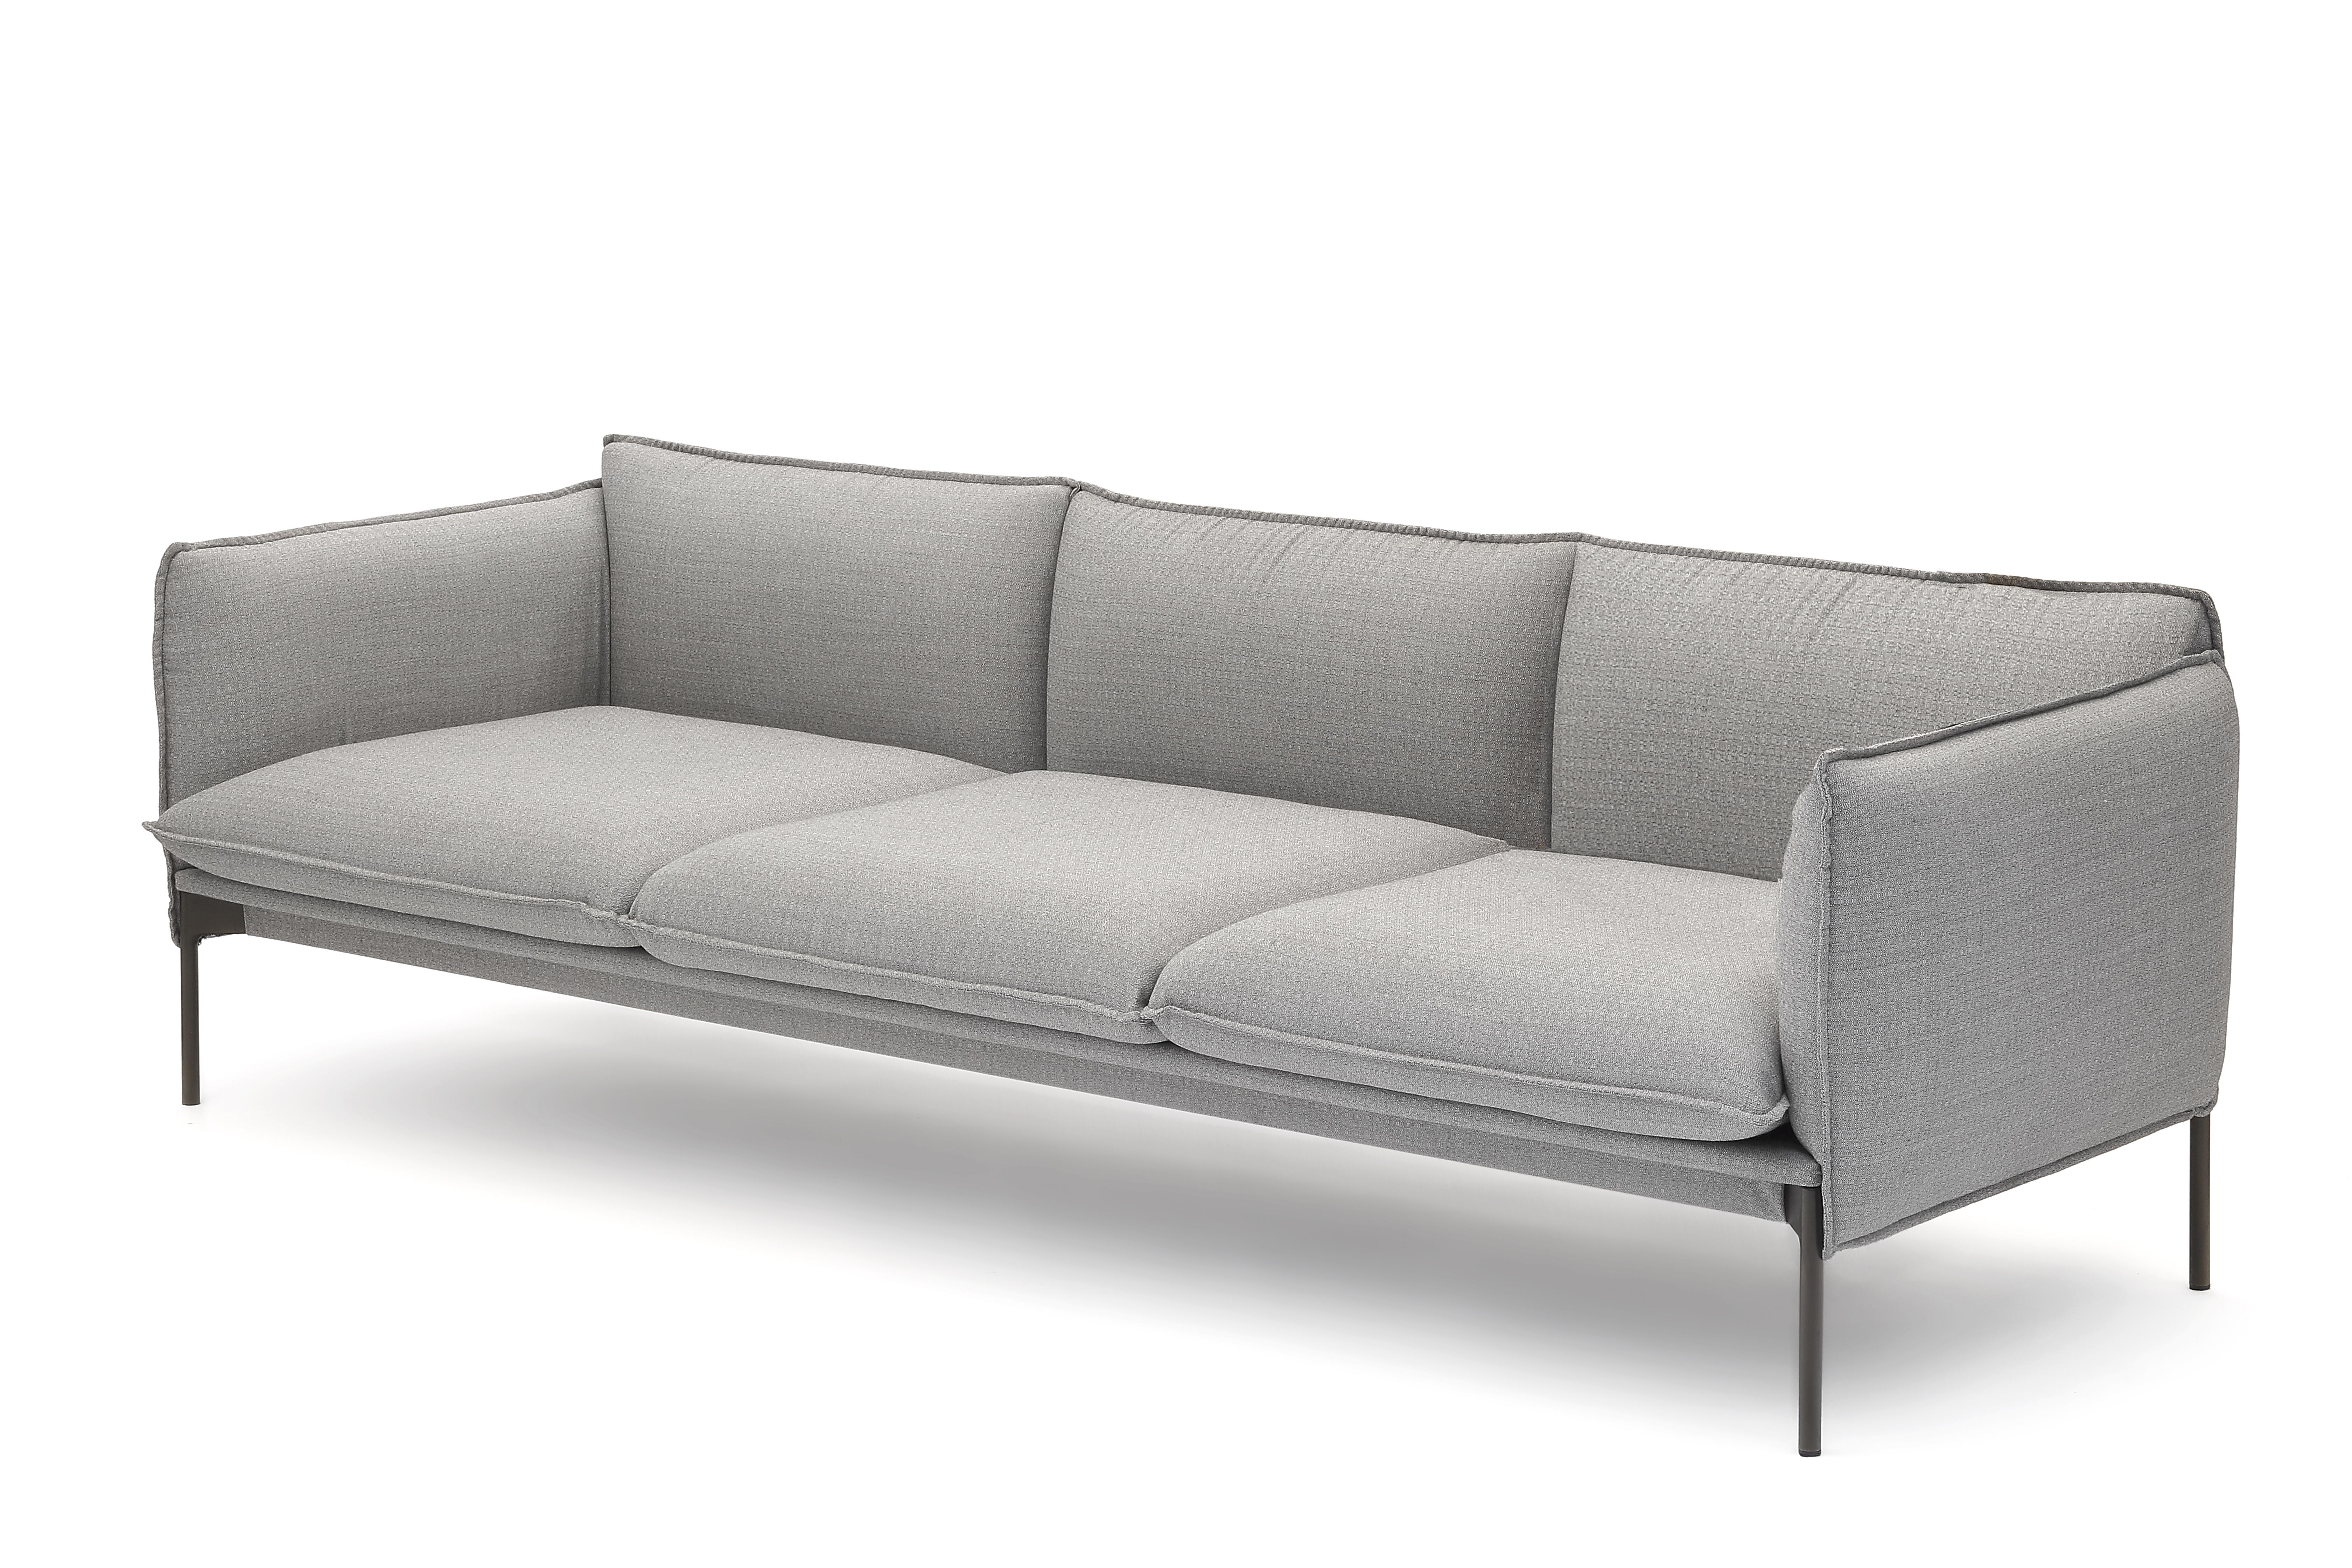 3 seat Palm Springs sofa by Anderssen & Voll
Materials: Polyurethane foam of different densities, covered with fabric or leather. Base in bronze lacquered metal.
Technique: Lacquered metal, upholstered in fabric. 
Dimensions: D 83 x W 230 x H 69